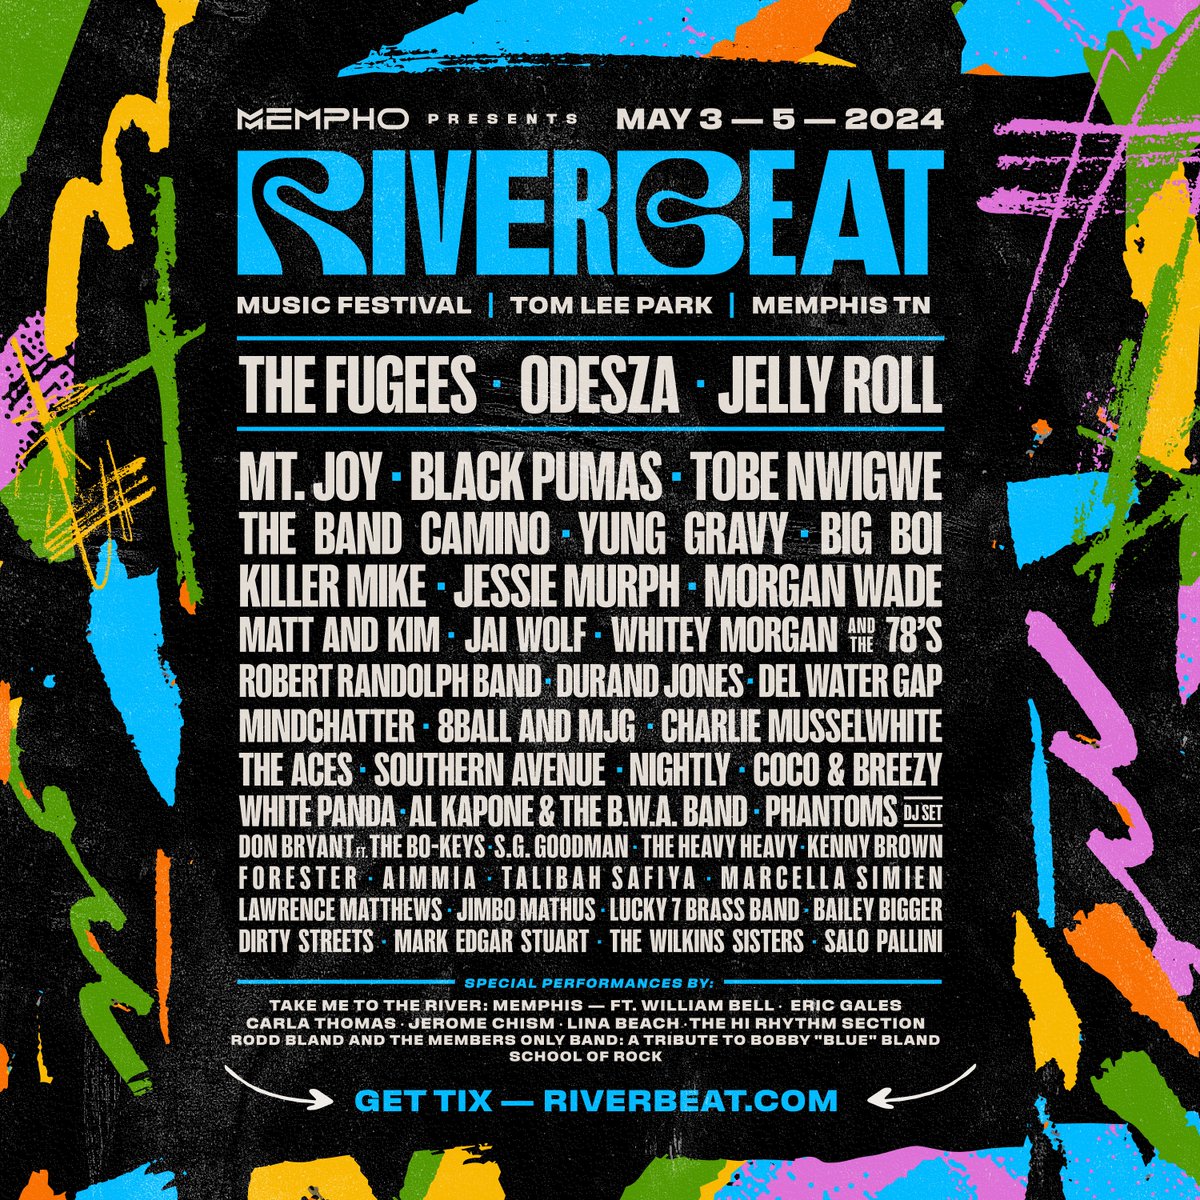 Always feels so good to play in our hometown. Brand new festival, honored to be on the first year’s line up. Memphis forever riverbeat.com